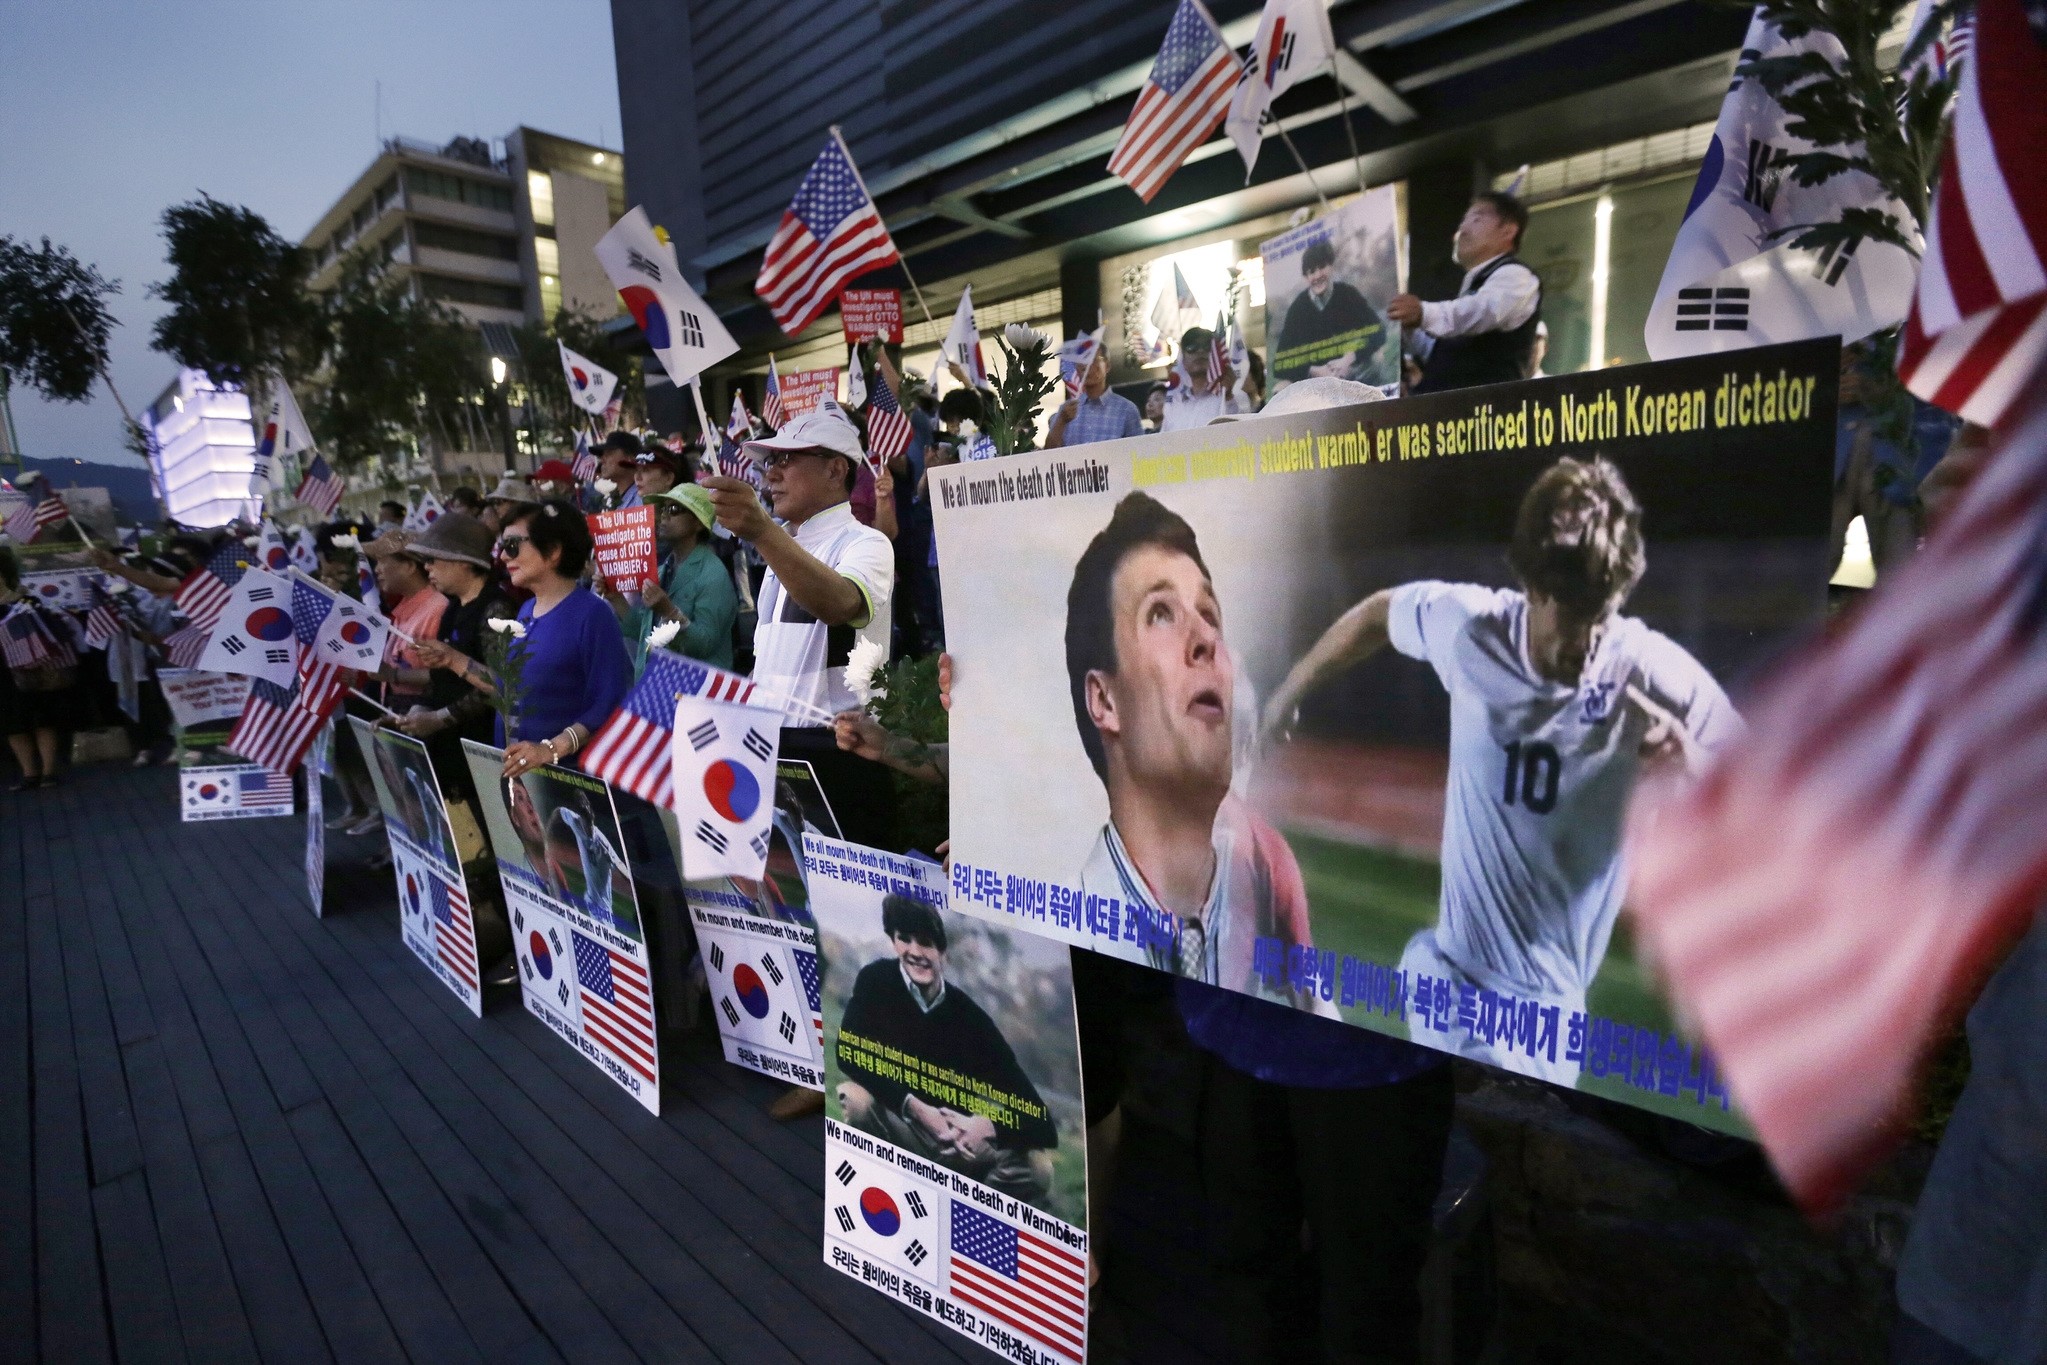 Supporters stage a memorial rally for the late American student Otto Warmbier near the U.S. Embassy in Seoul, South Korea, Friday, June 23, 2017. (AP Photo)